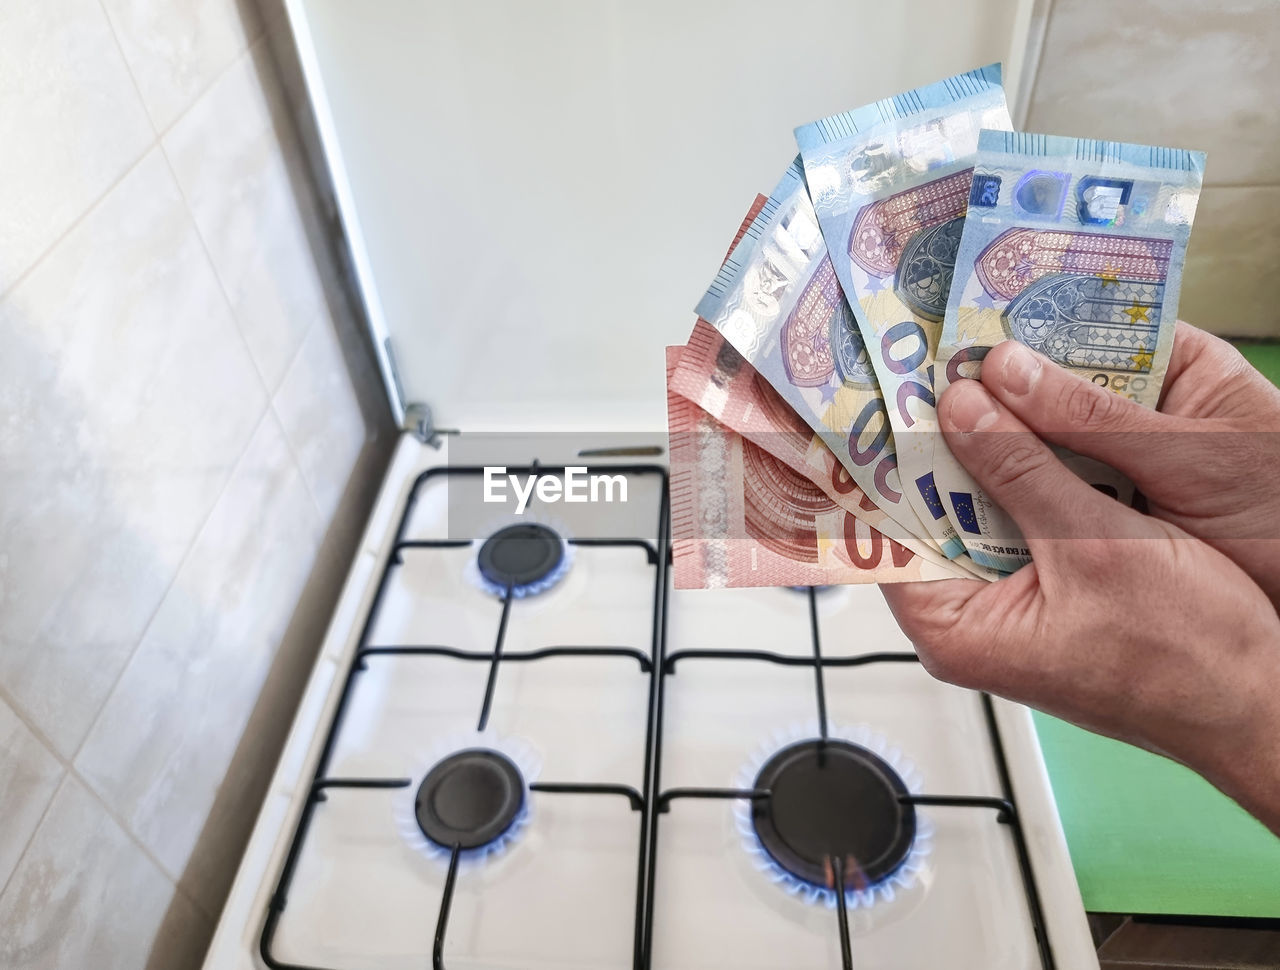 Energy efficiency with gas cooker and euro currency  the cost of natural gas is more expensive 